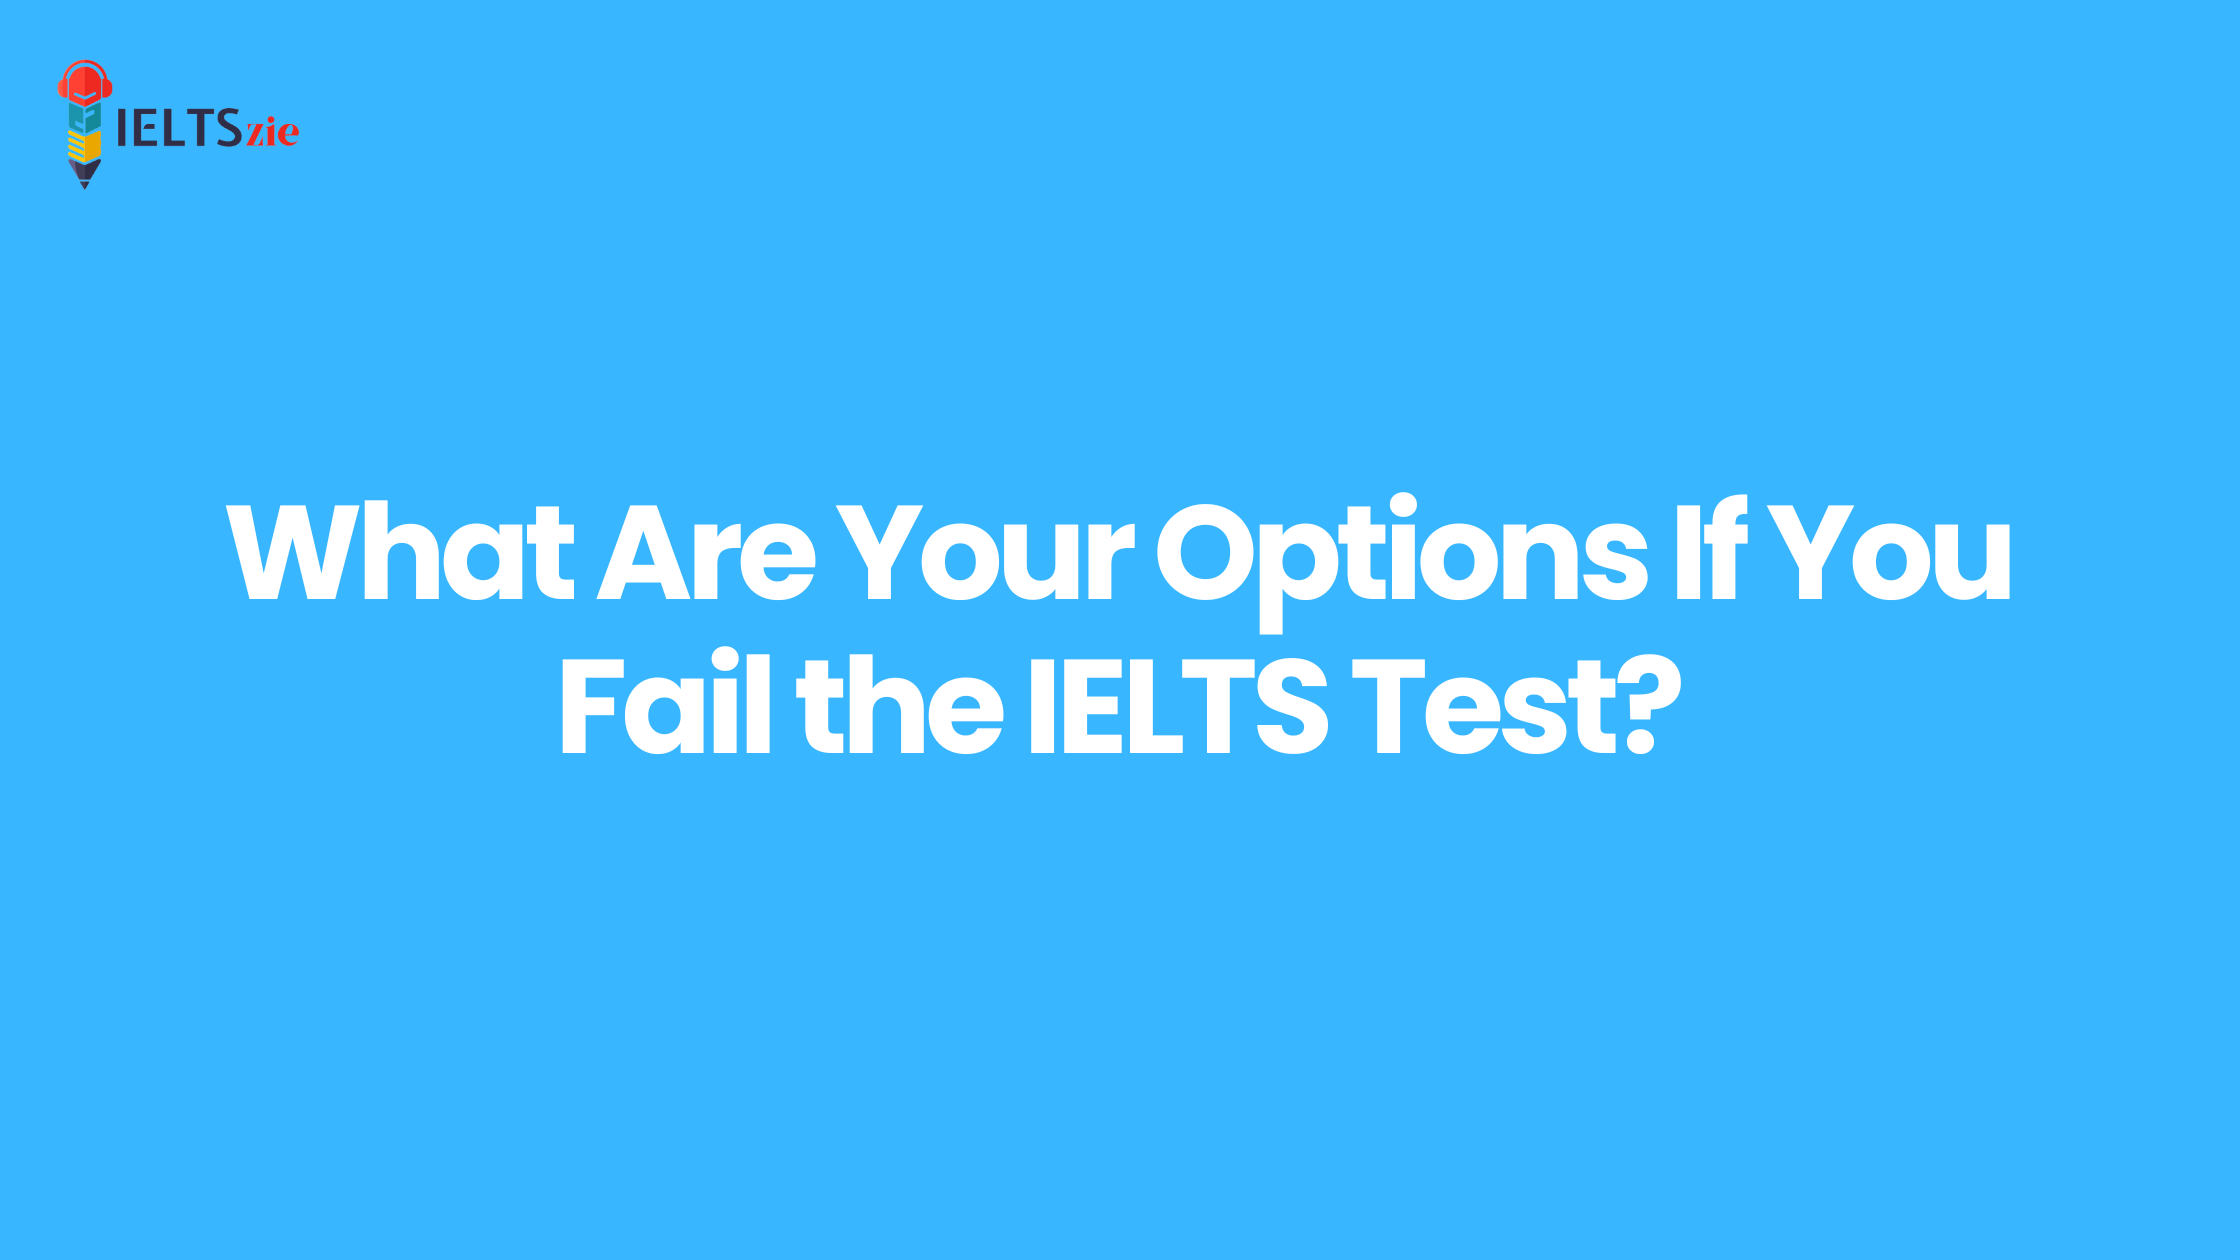 options-if-you-fail-the-ielts-test